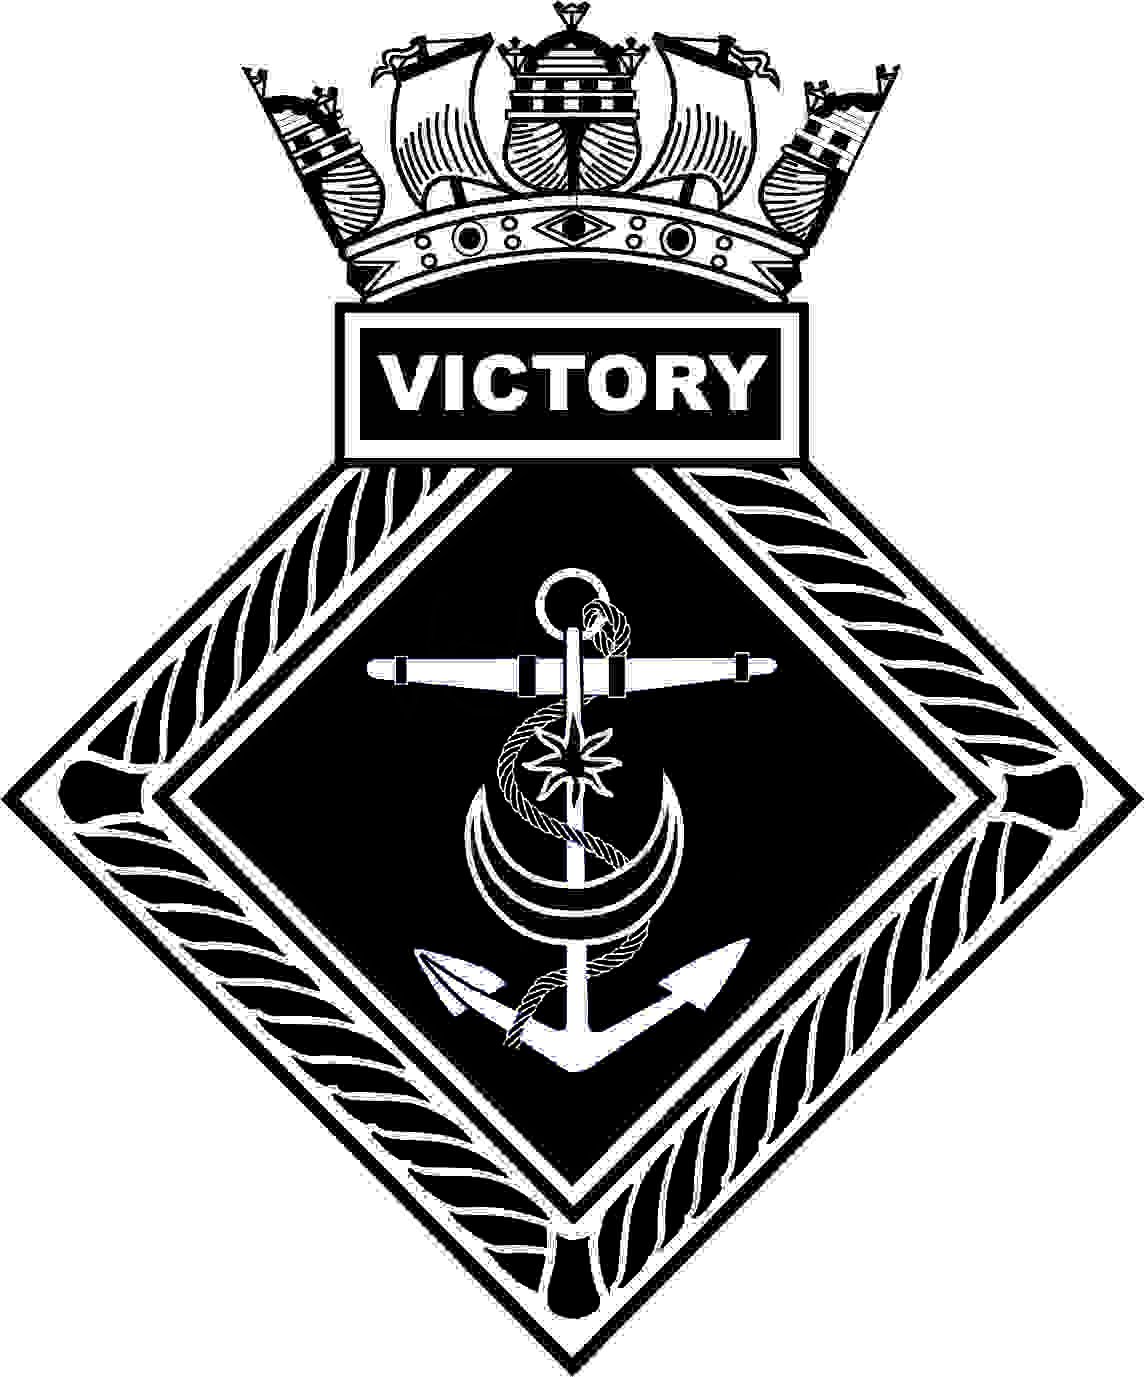 Completed artwork for ships crest of HMS Victory is a diamond shaped ships crest surrounded by a rope border with a box with the name Victory on top. Above this is a naval crown. Inside the rope is a ships anchor with a rope, a star and a crescent opening upward.  